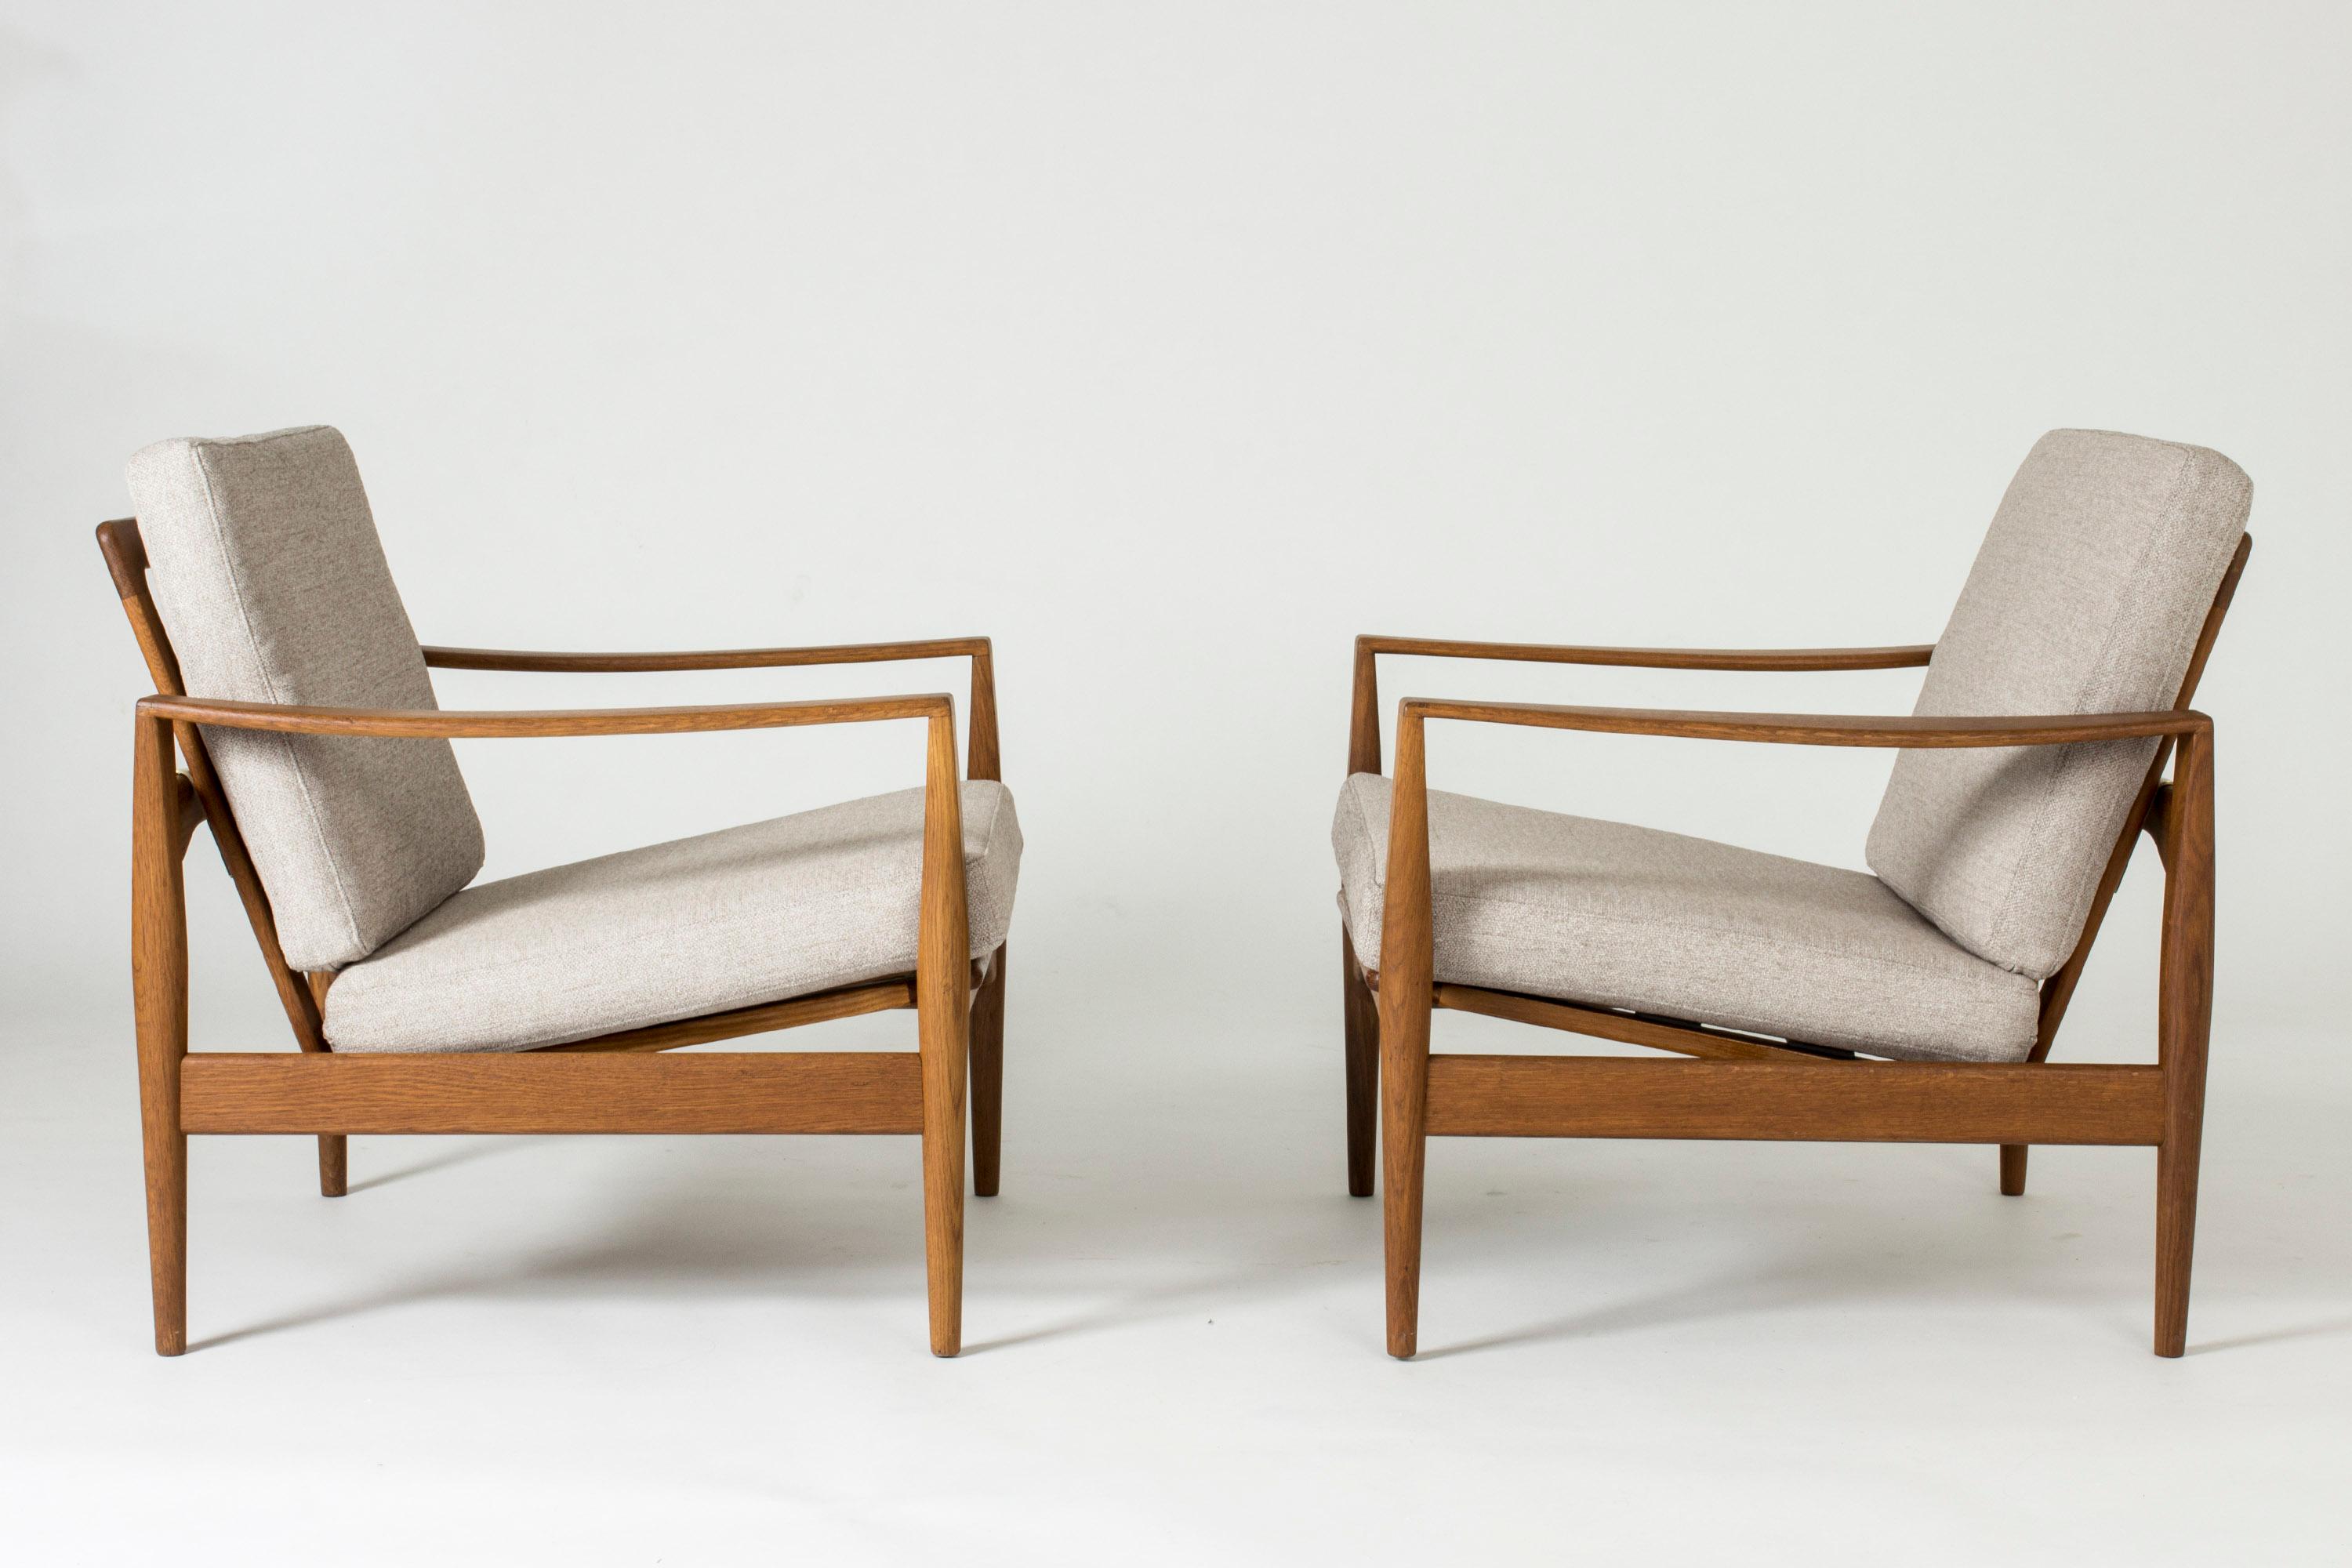 Pair of oak lounge chairs by Illum Wikkelsø in a casually elegant design. Cool open silhouettes with distinct lines, decorative joinery on the armrests.
  